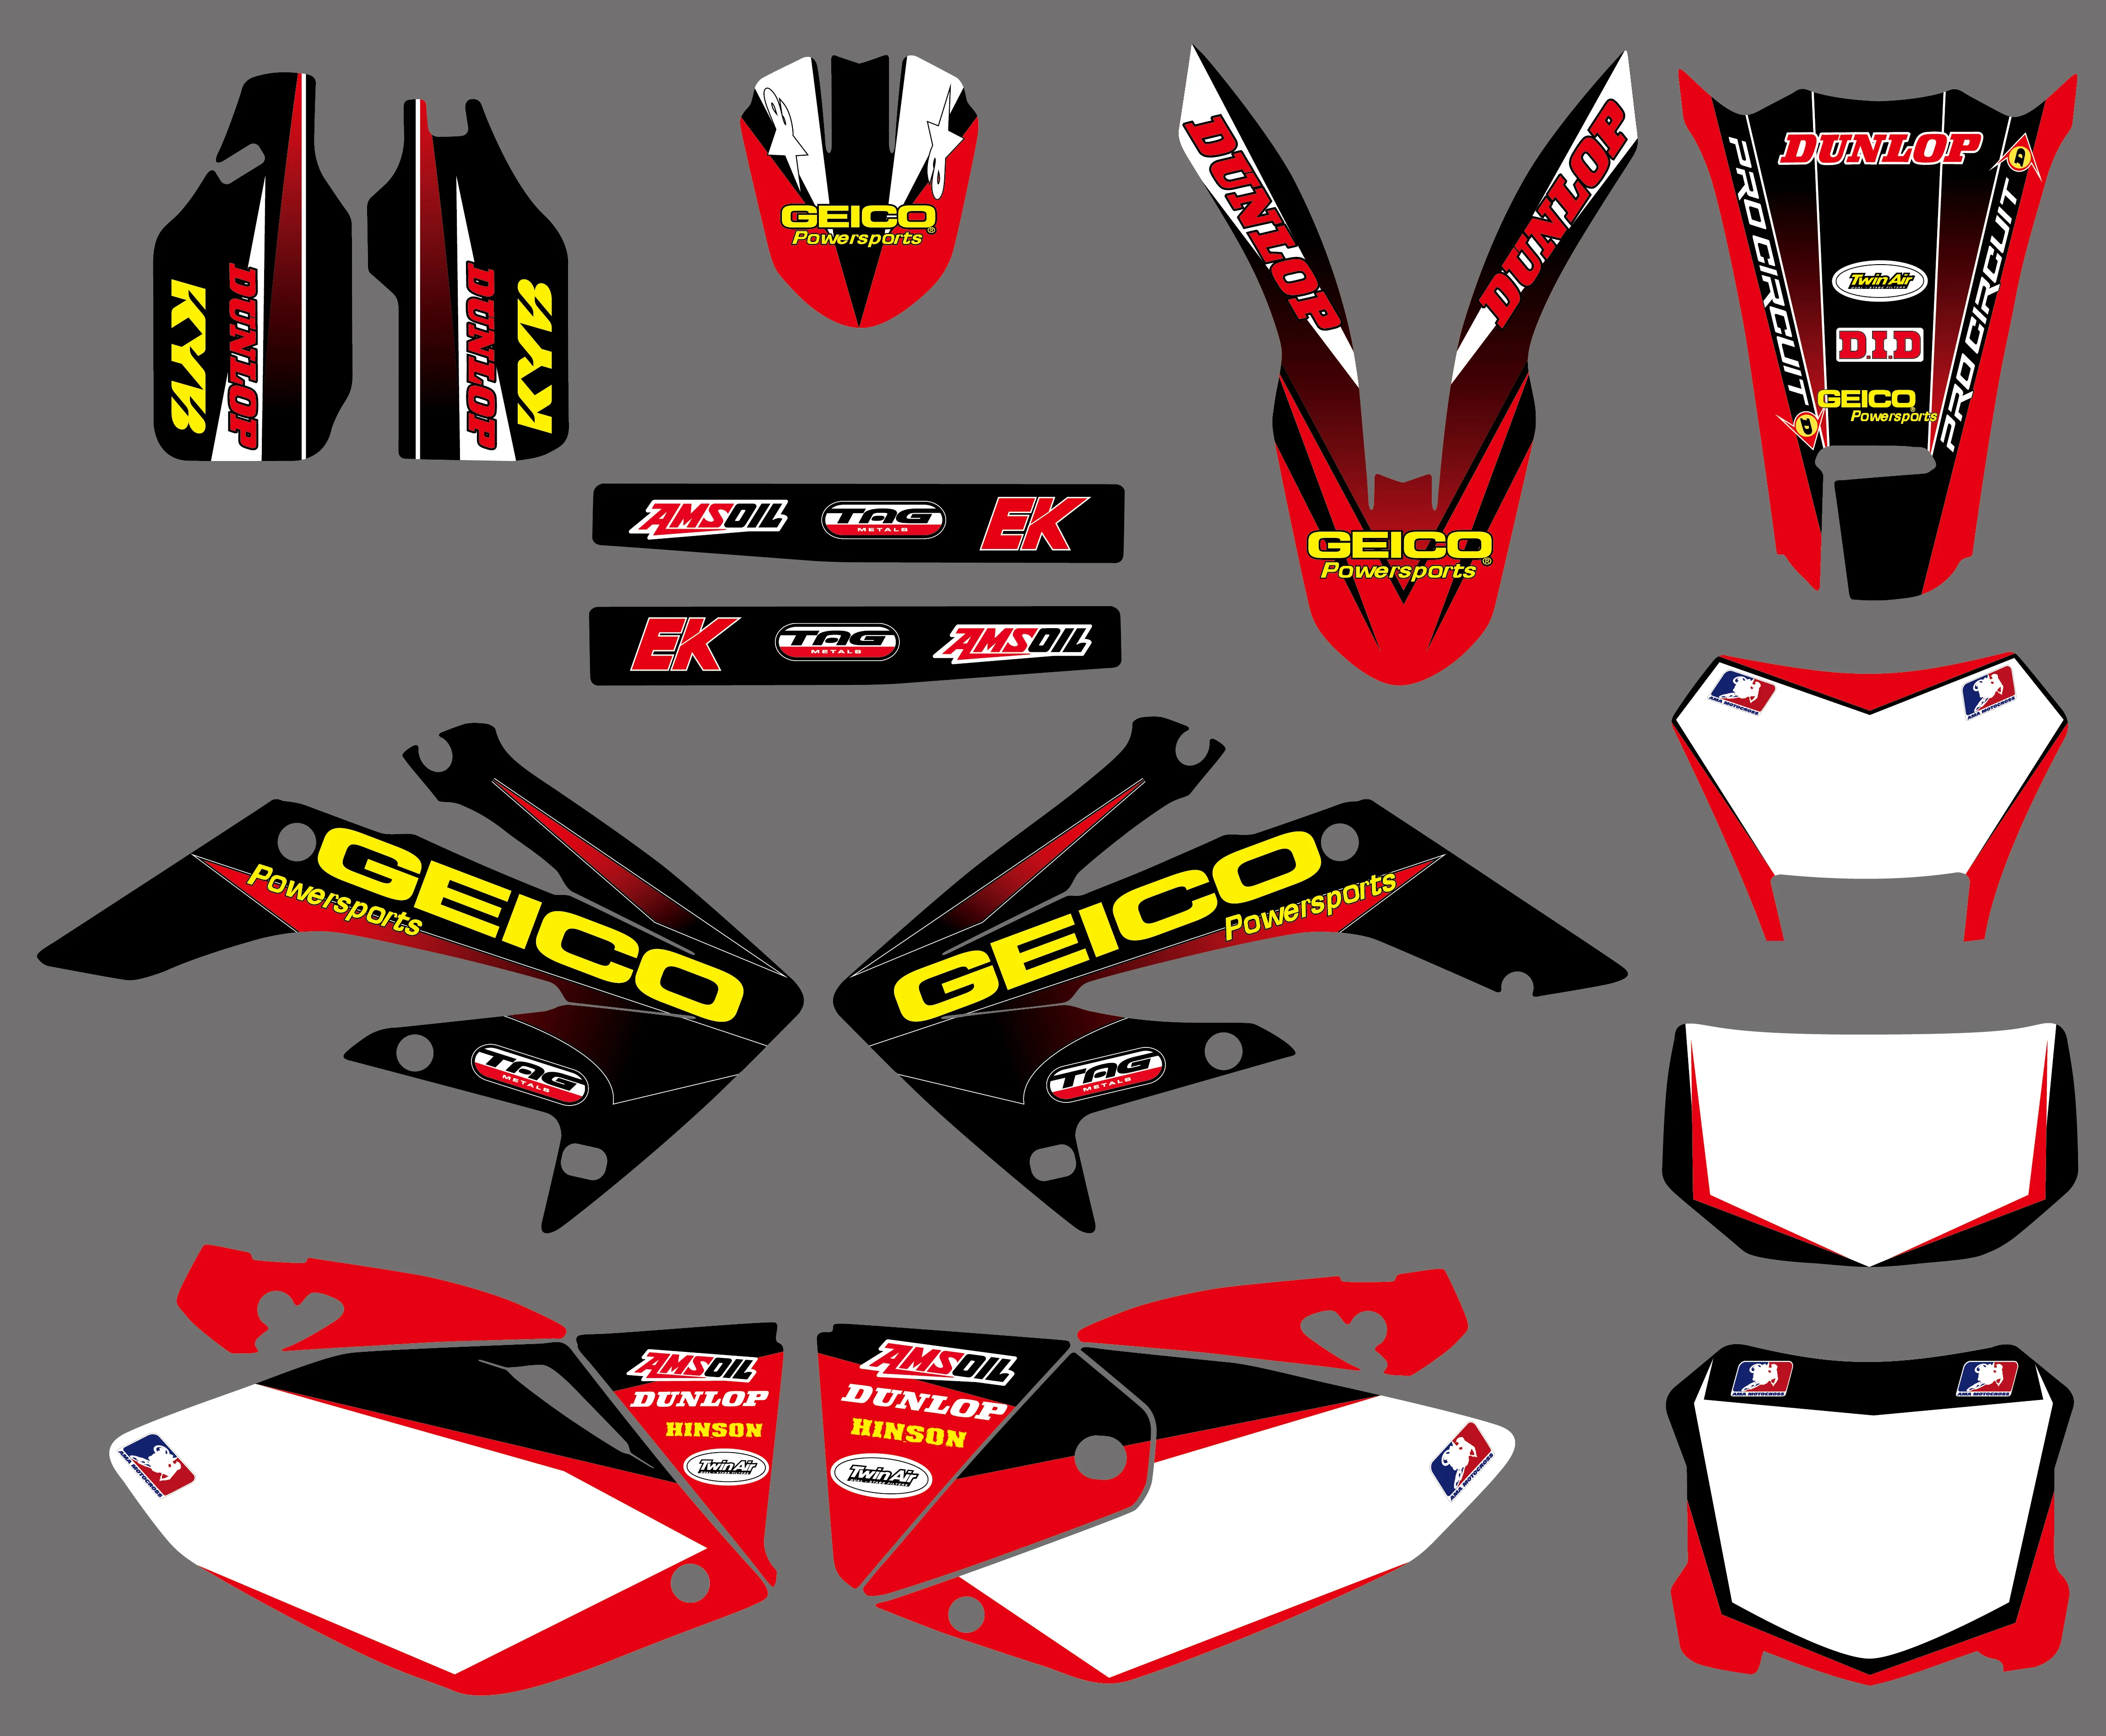 TEAM GRAPHICS & BACKGROUNDS DECAL STICKERS For HONDA CRF250X 2004 2005 2006 2007 2008 2009 2010 2011 2012 Motorcycle Decoration